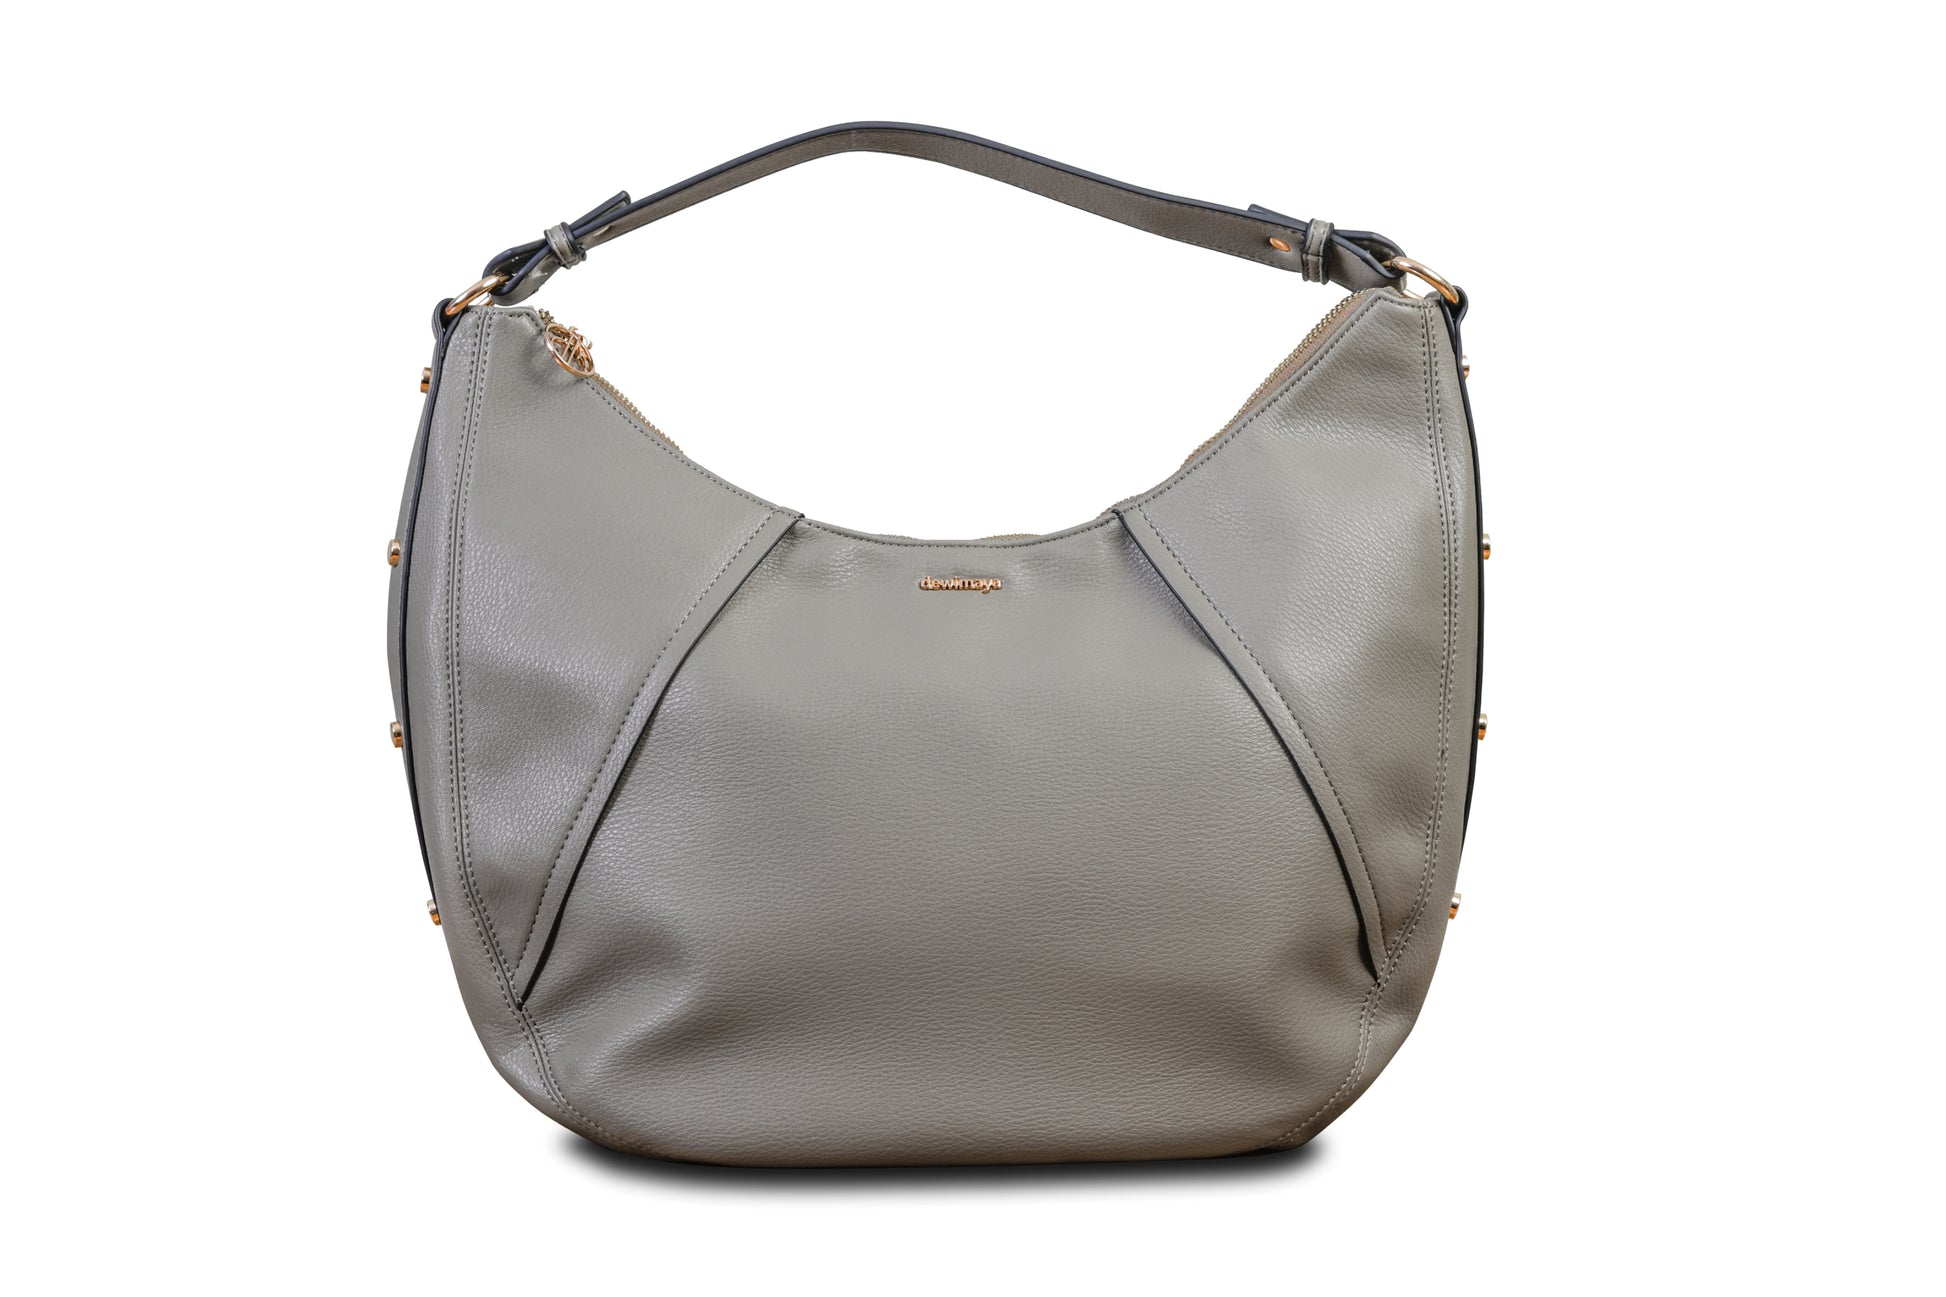 Luna Gray Crescent Pebble Grain Faux Leather Handbag made by Dewi Maya front view available at the best boutique in Upstate South Carolina Spartanburg Greenville Dewi Maya Boutique